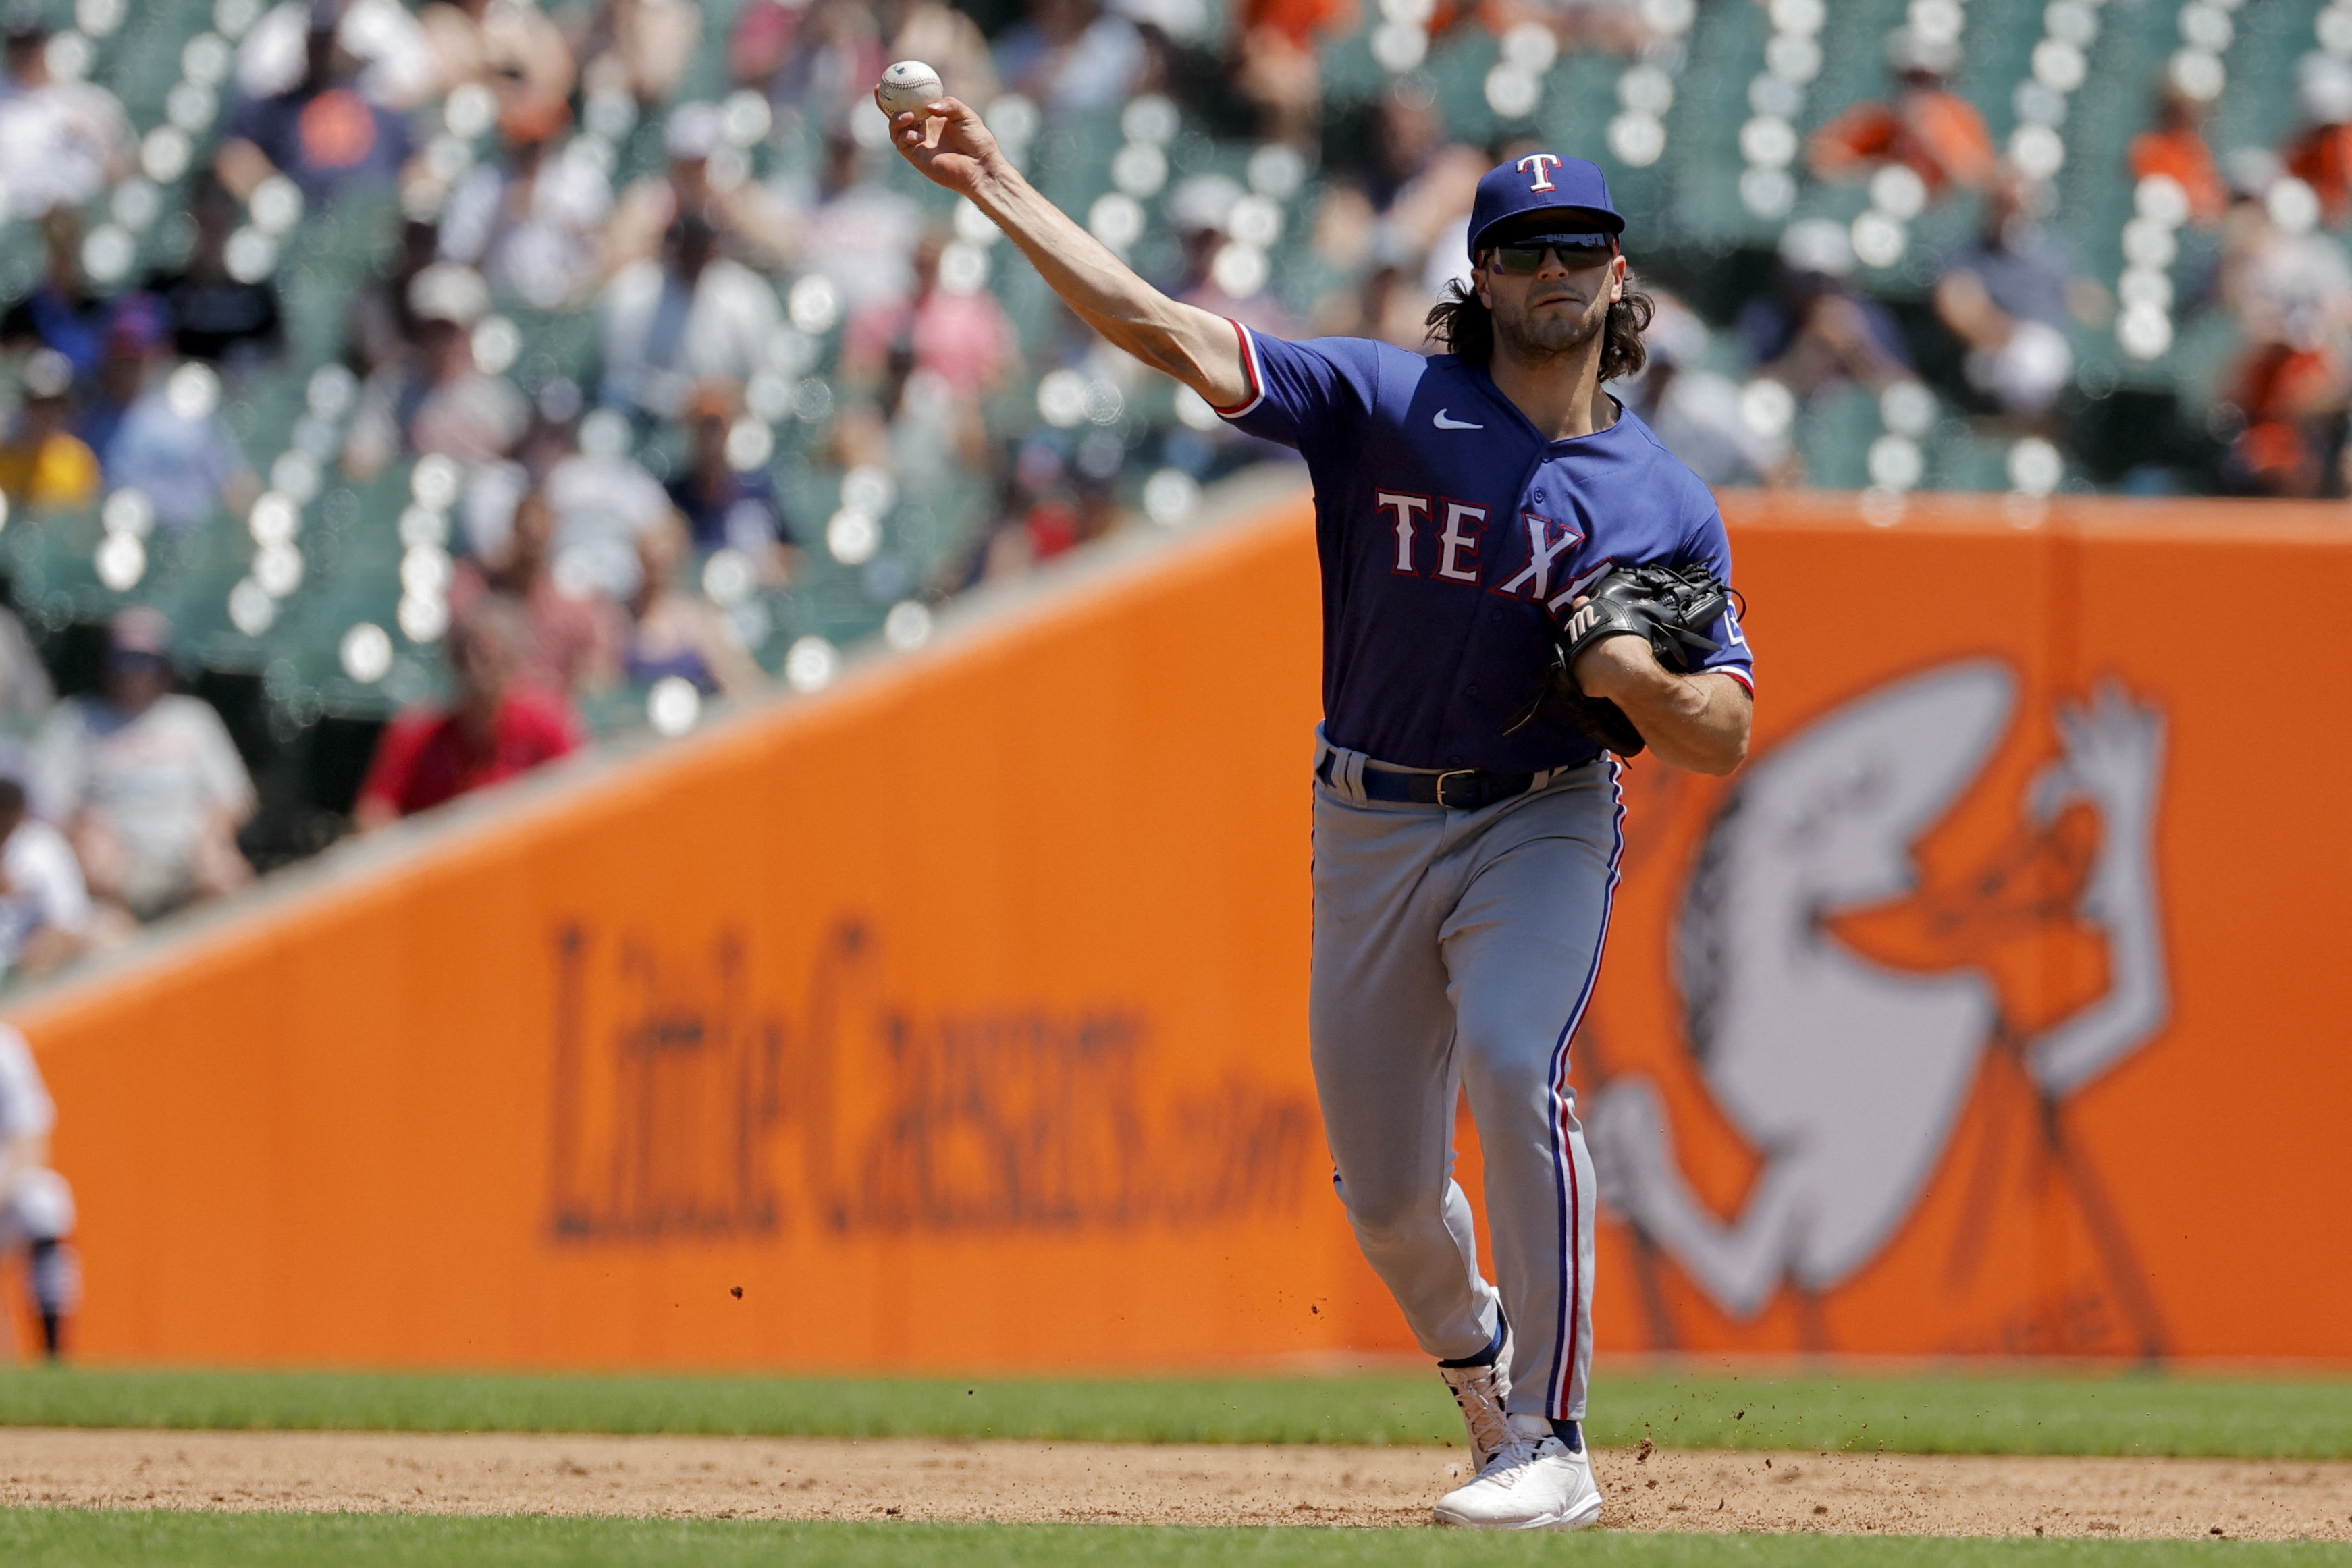 Newcomer Jake Marisnick gets key hit as Tigers top Rangers